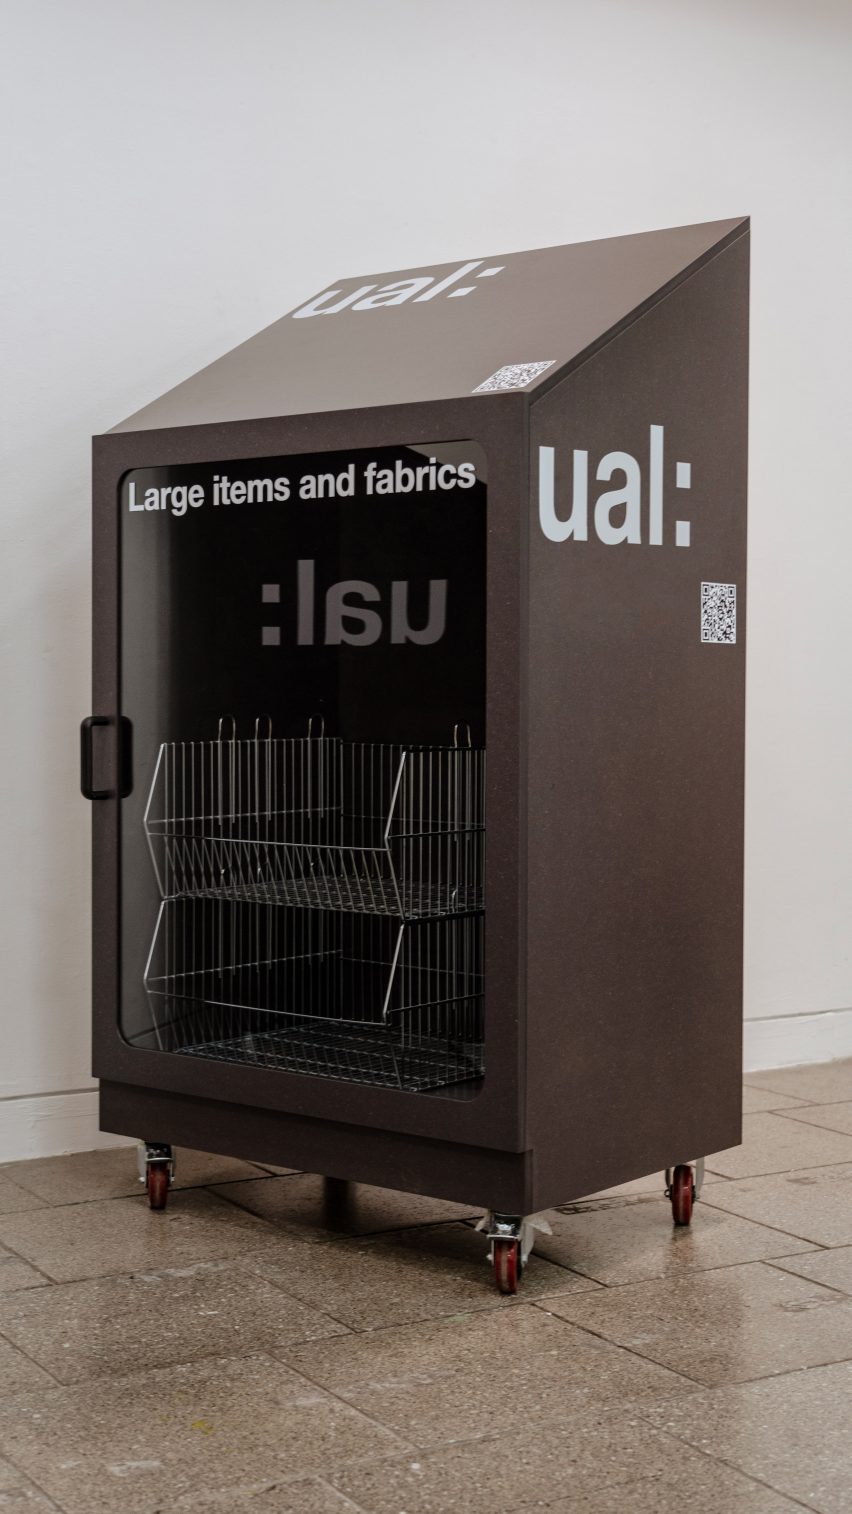 Donation box for large items and fabrics by University of the Arts London (UAL)